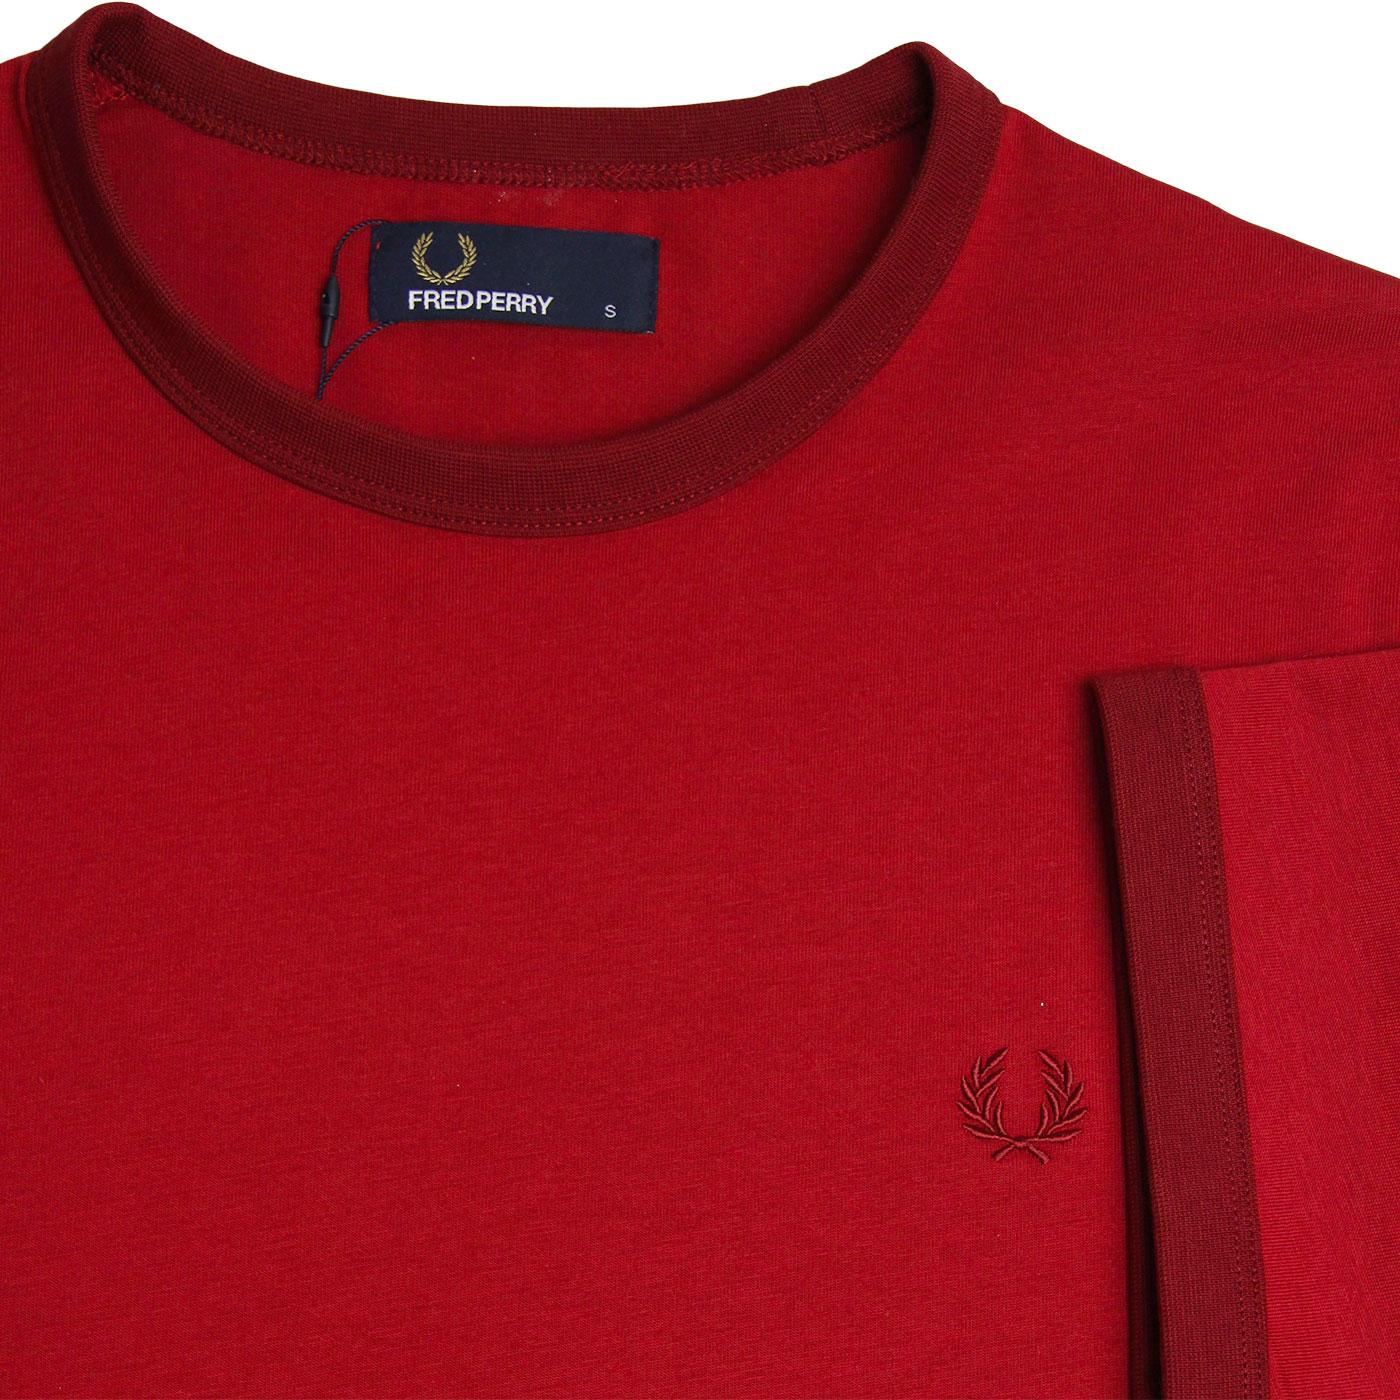 FRED PERRY Retro Mod Crew Neck Ringer T-shirt in Rich Red